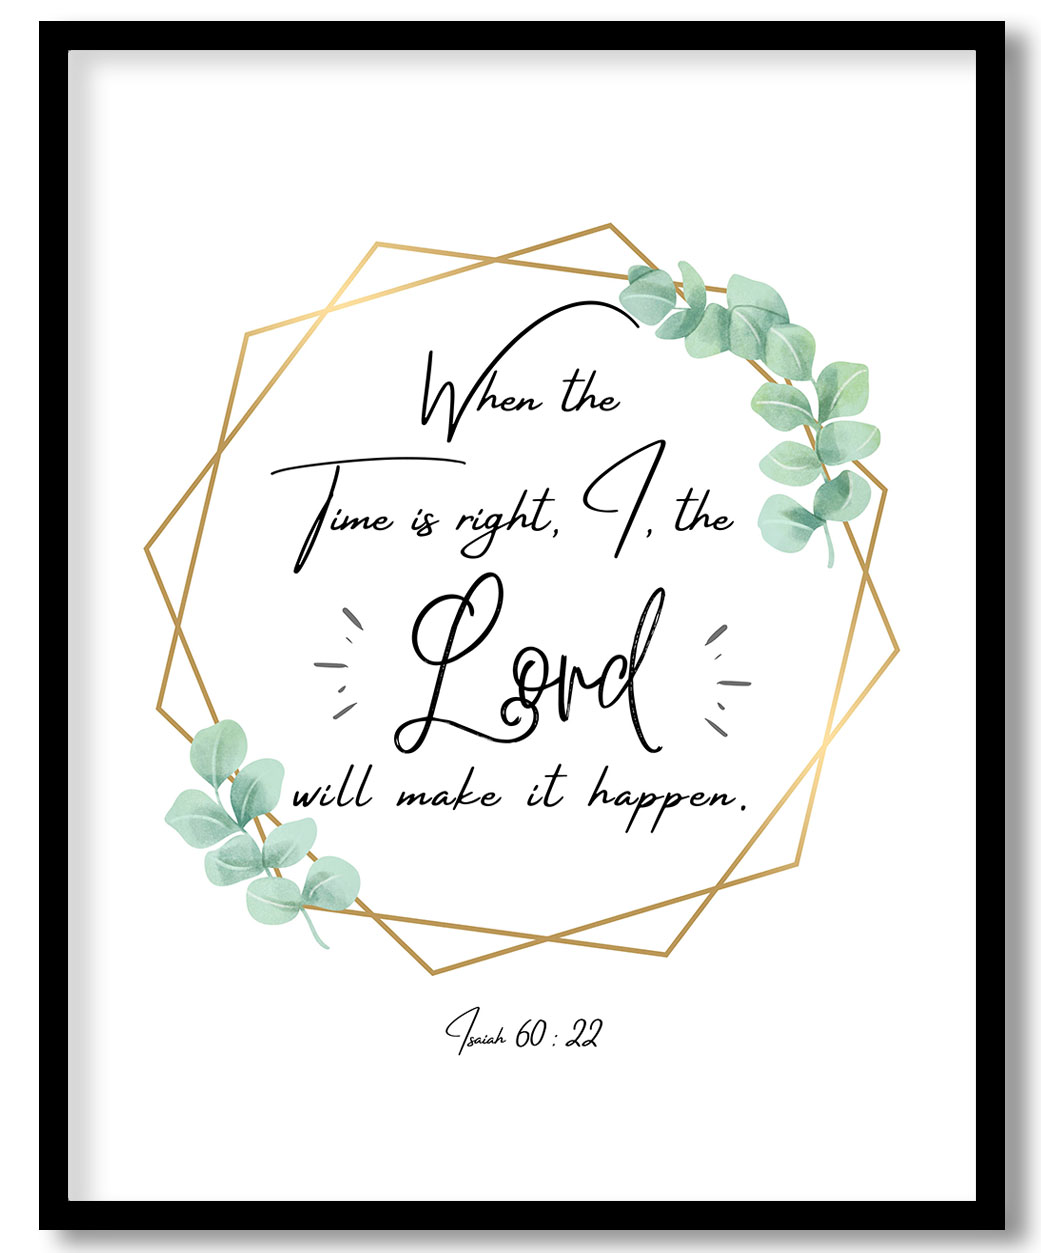 Bible Verse Wall Decor, Isaiah 60 22 When the time is right, I the Lord will make it happen Art Decor, Framed Painting, Home Decor